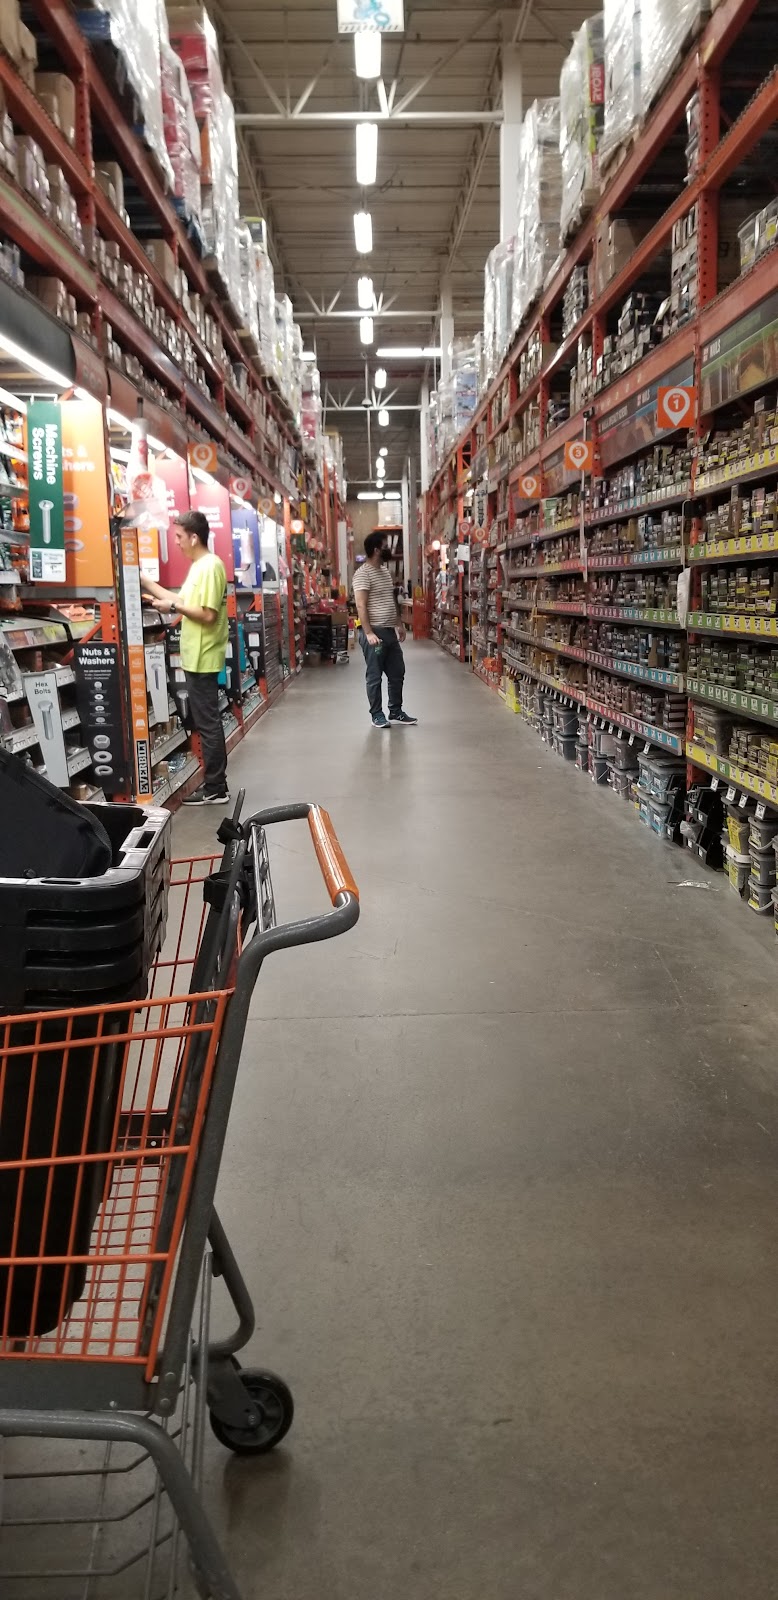 The Home Depot | 75-09 Woodhaven Blvd, Queens, NY 11385, USA | Phone: (718) 830-3323